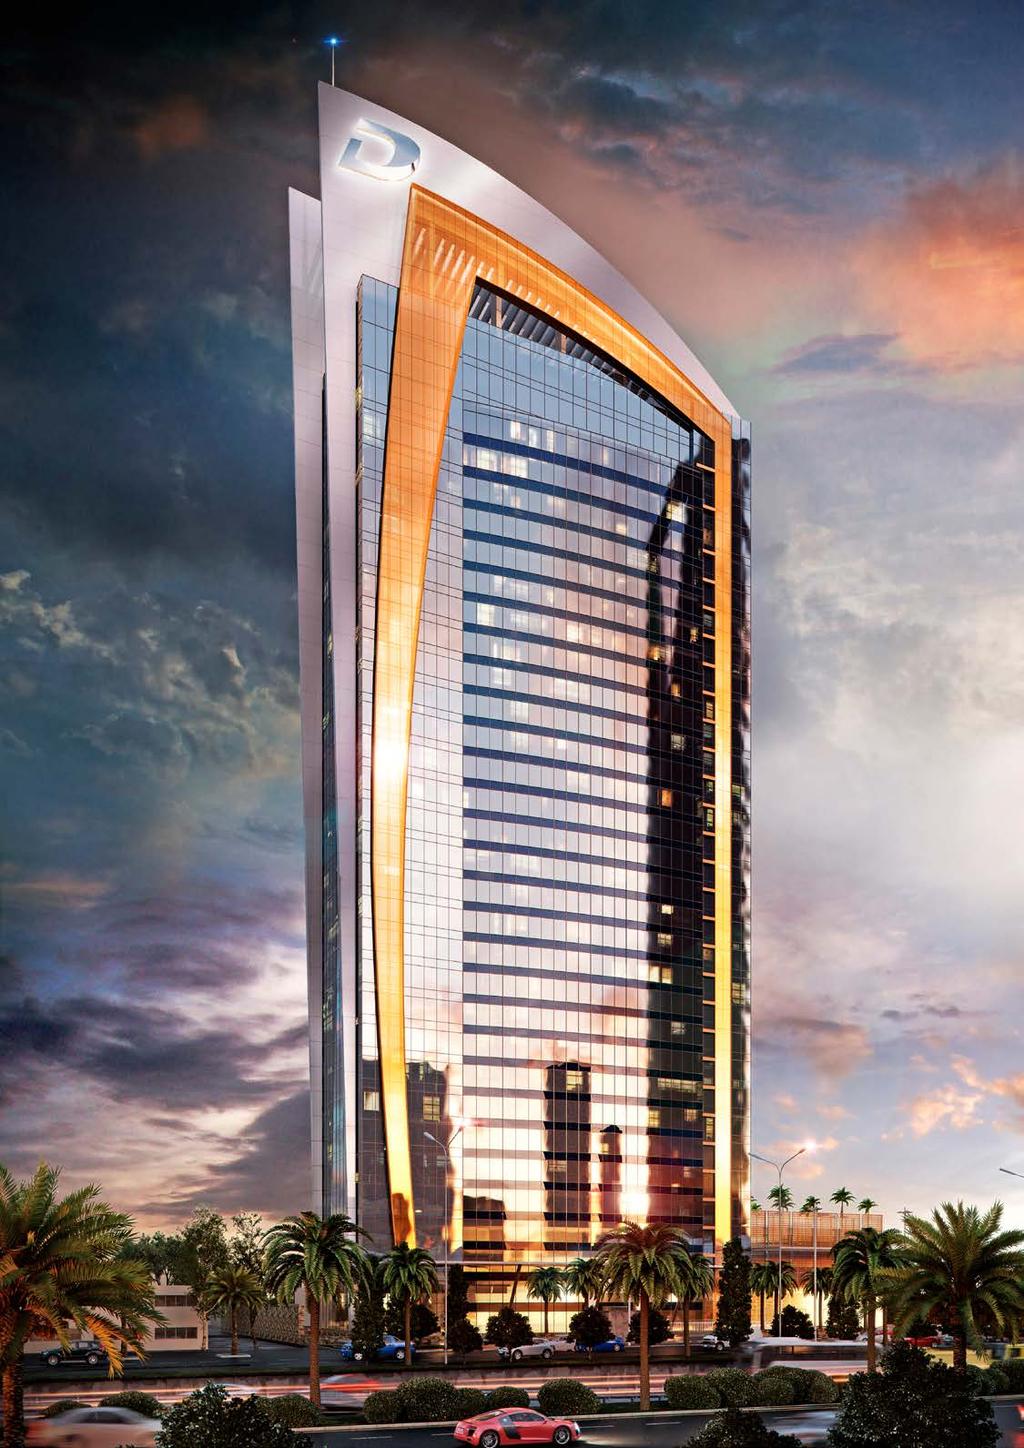 With an unmatched location on King Fahd Road, facing Kingdom Tower in the heart of Riyadh, DAMAC Esclusiva represents a truly unique